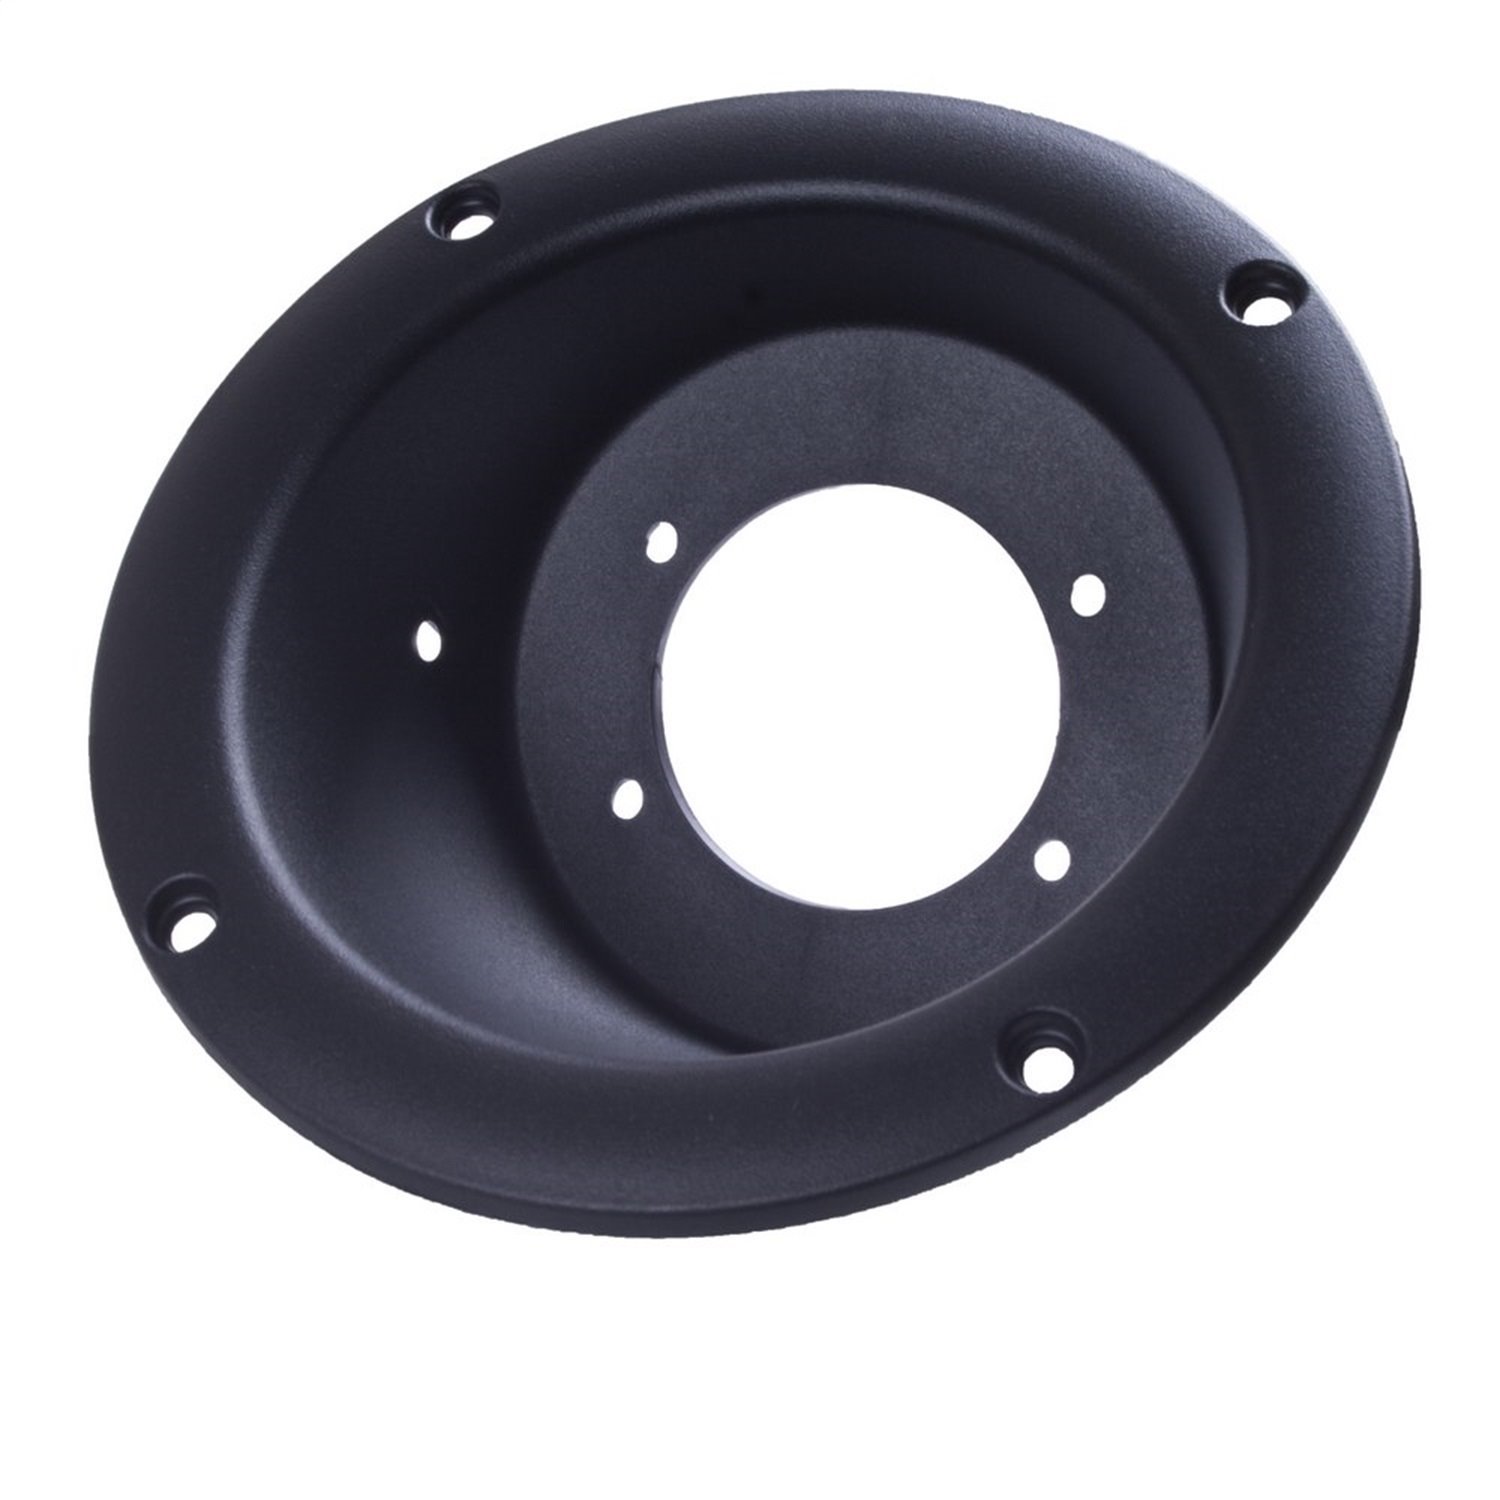 This gas filler neck bezel from Omix-ADA fits 97-06 Jeep Wrangler TJ and LJ Wrangler Unlimited models.